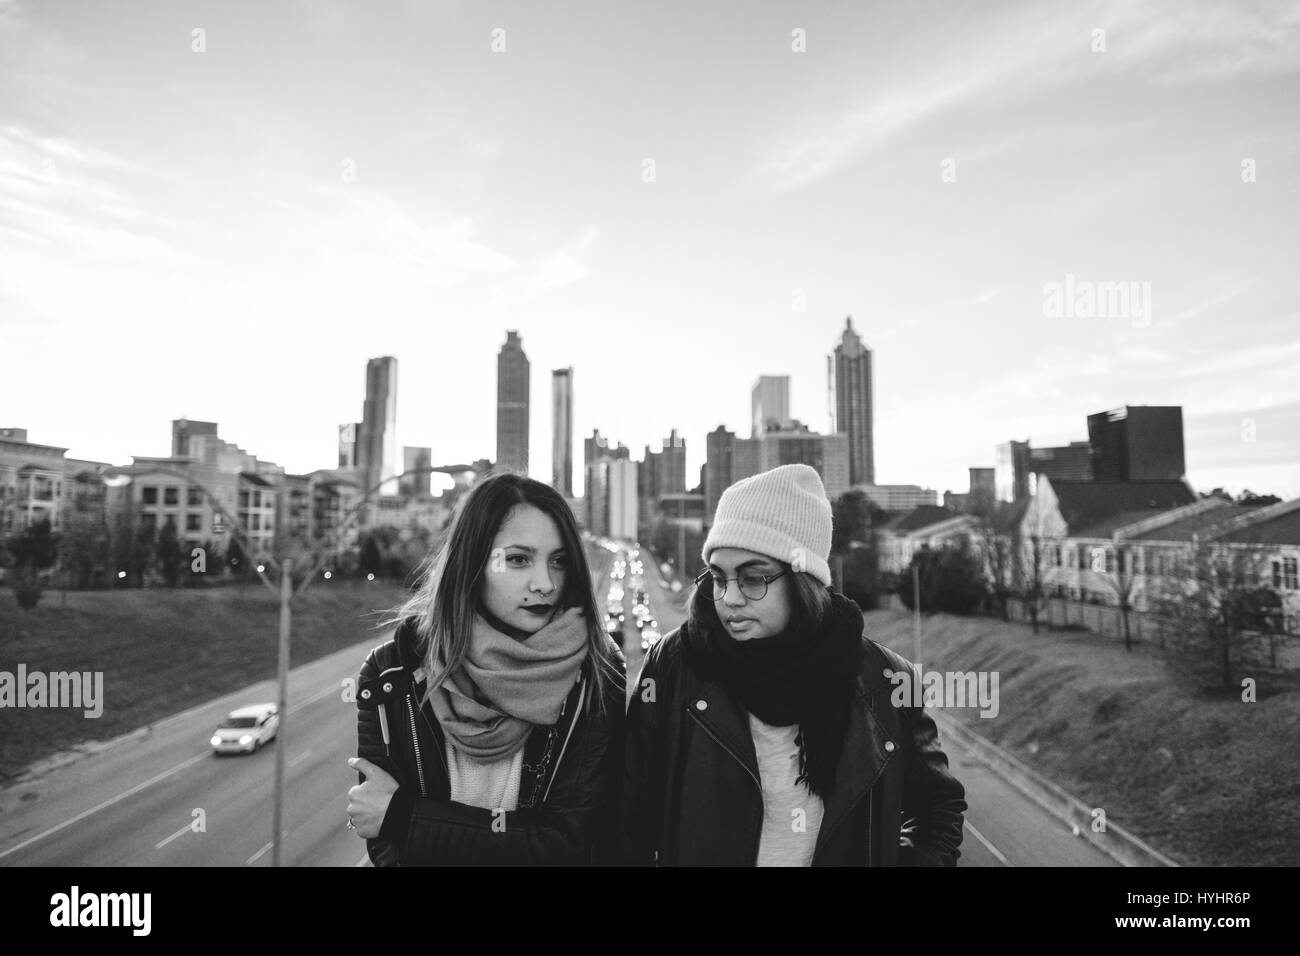 Young ethnic girls standing on bridge with city skyline in the background Stock Photo